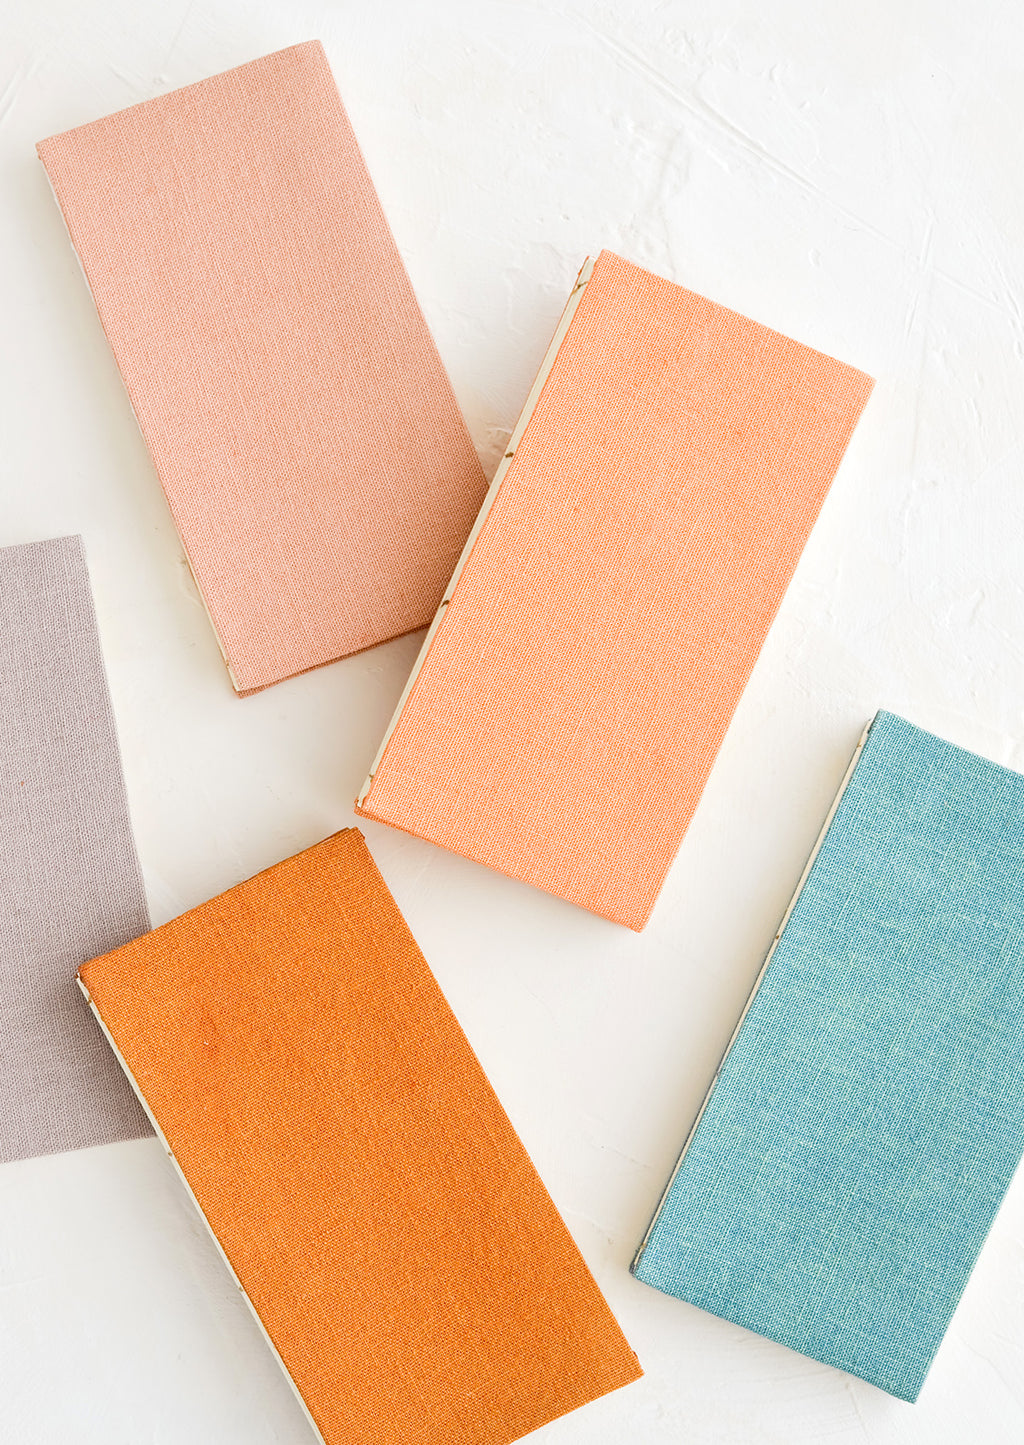 1: Five cloth-covered notebooks in naturally dyed hues.